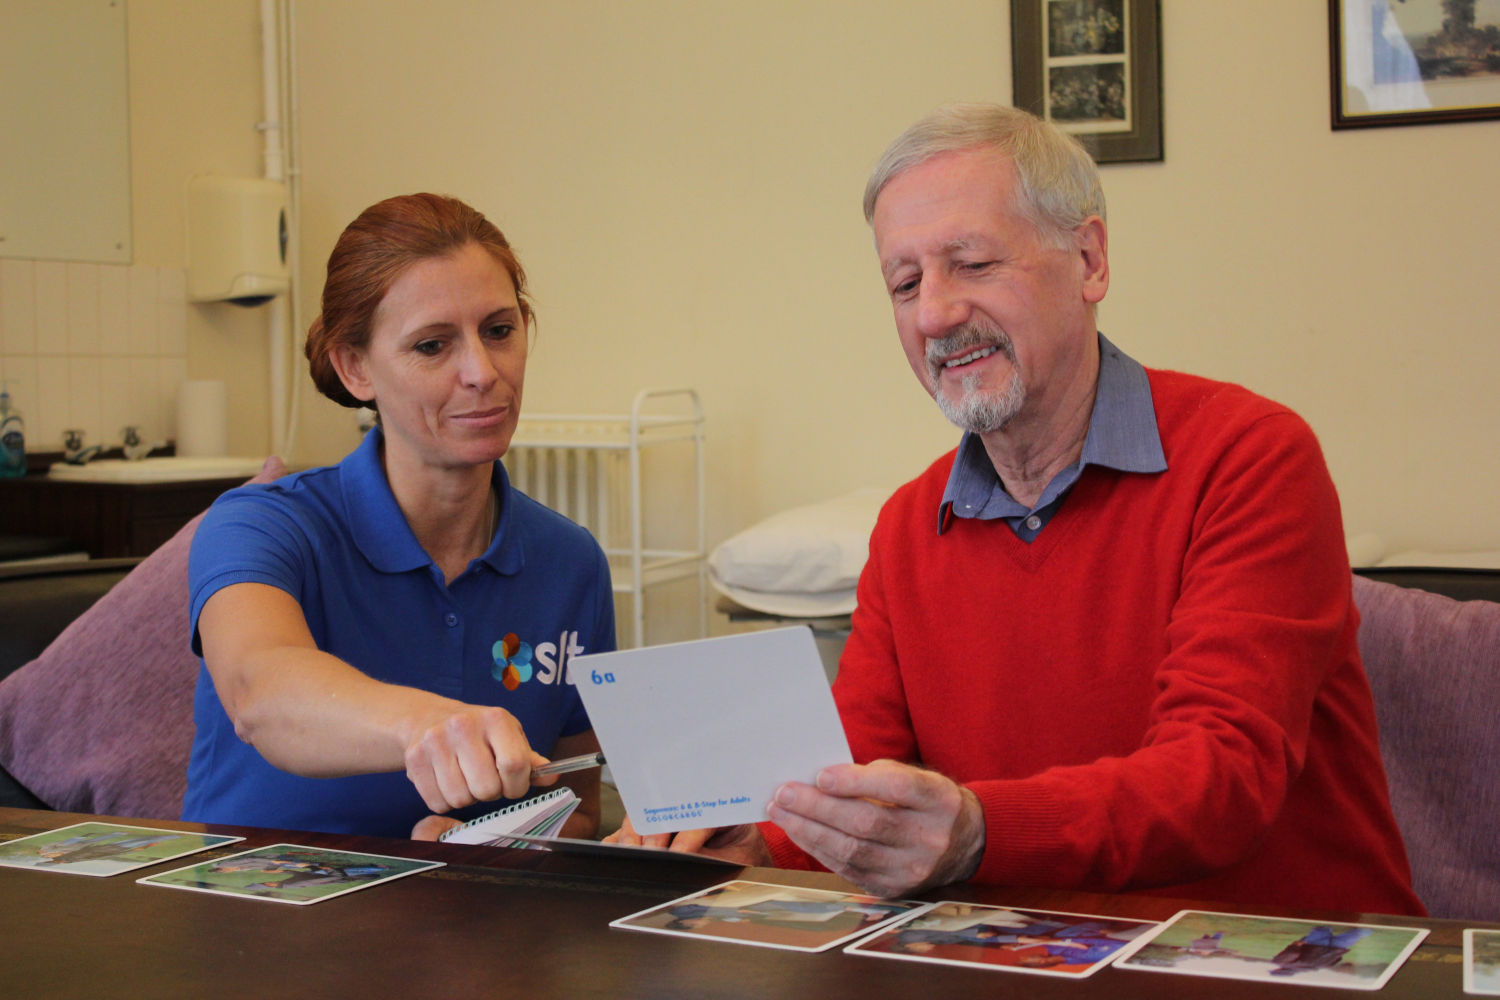 SLT therapist pointing to card in patient's hand.